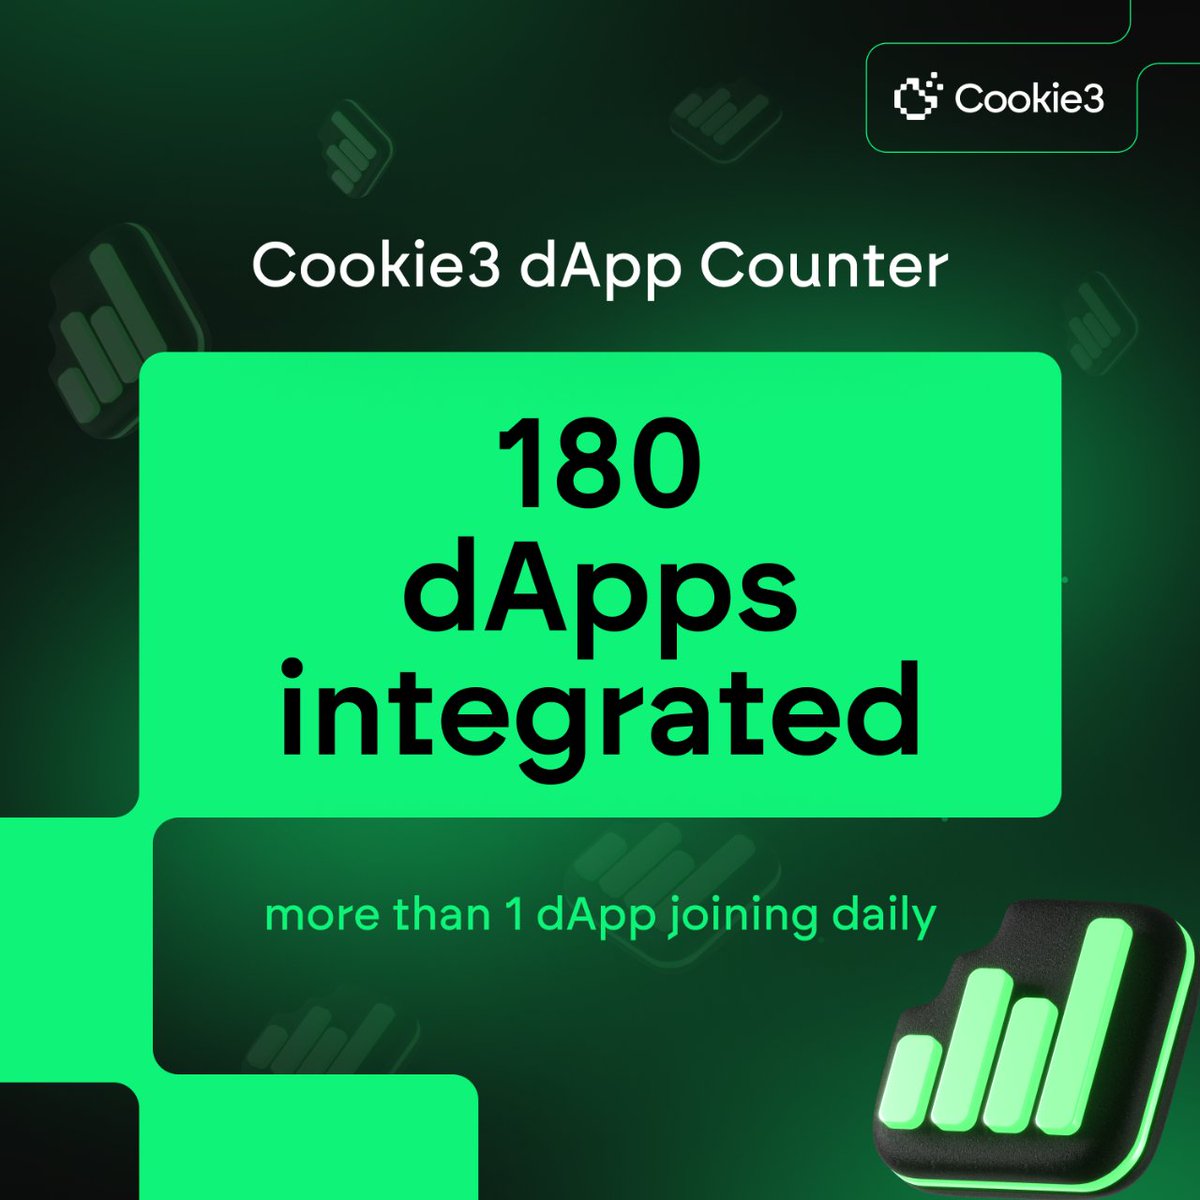 Cookie3 is on a roll! 🍪 This week we added 10 new #dApps to our ever-growing roster bringing our total to a sweet 180! Among these projects we had @UmojaProtocol join names such as @Chain_GPT and @GameSwift_io.